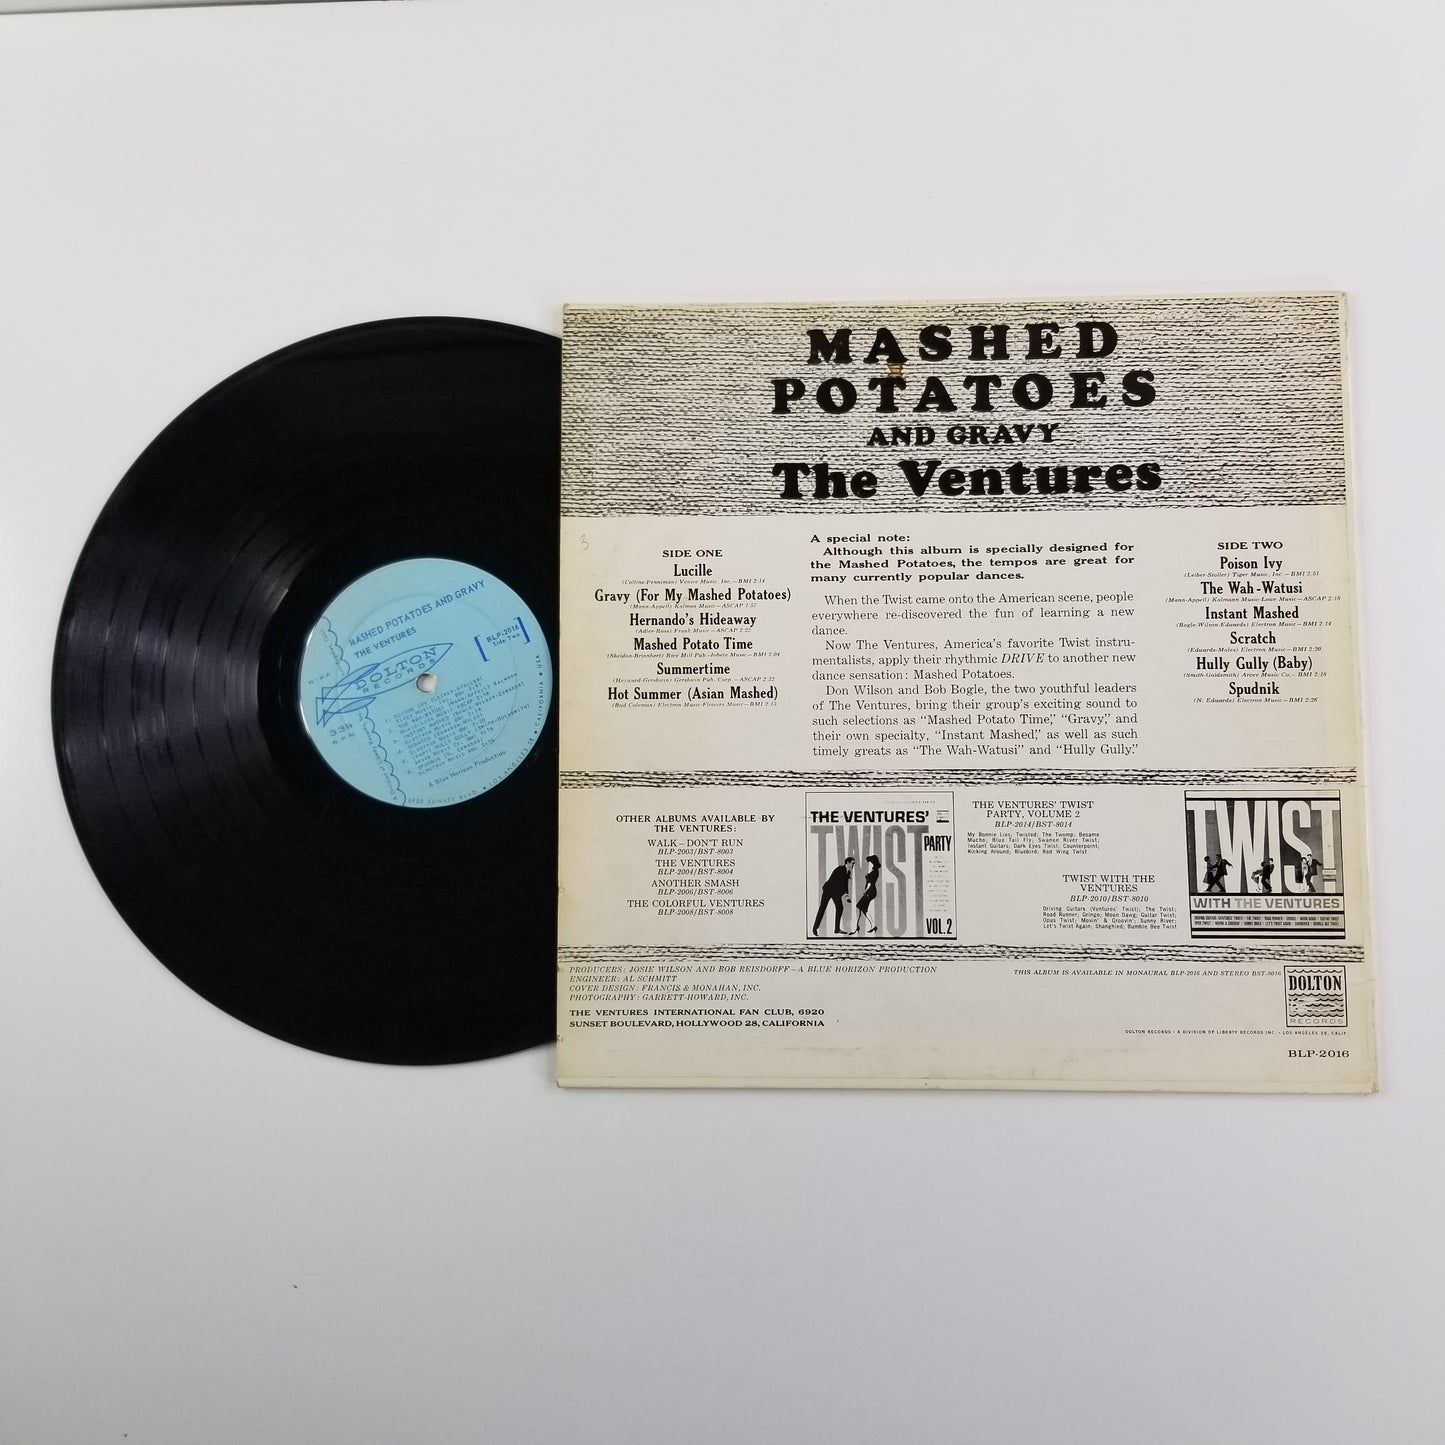 Mashed Potatoes and Gravy - The Ventures (1962, LP)